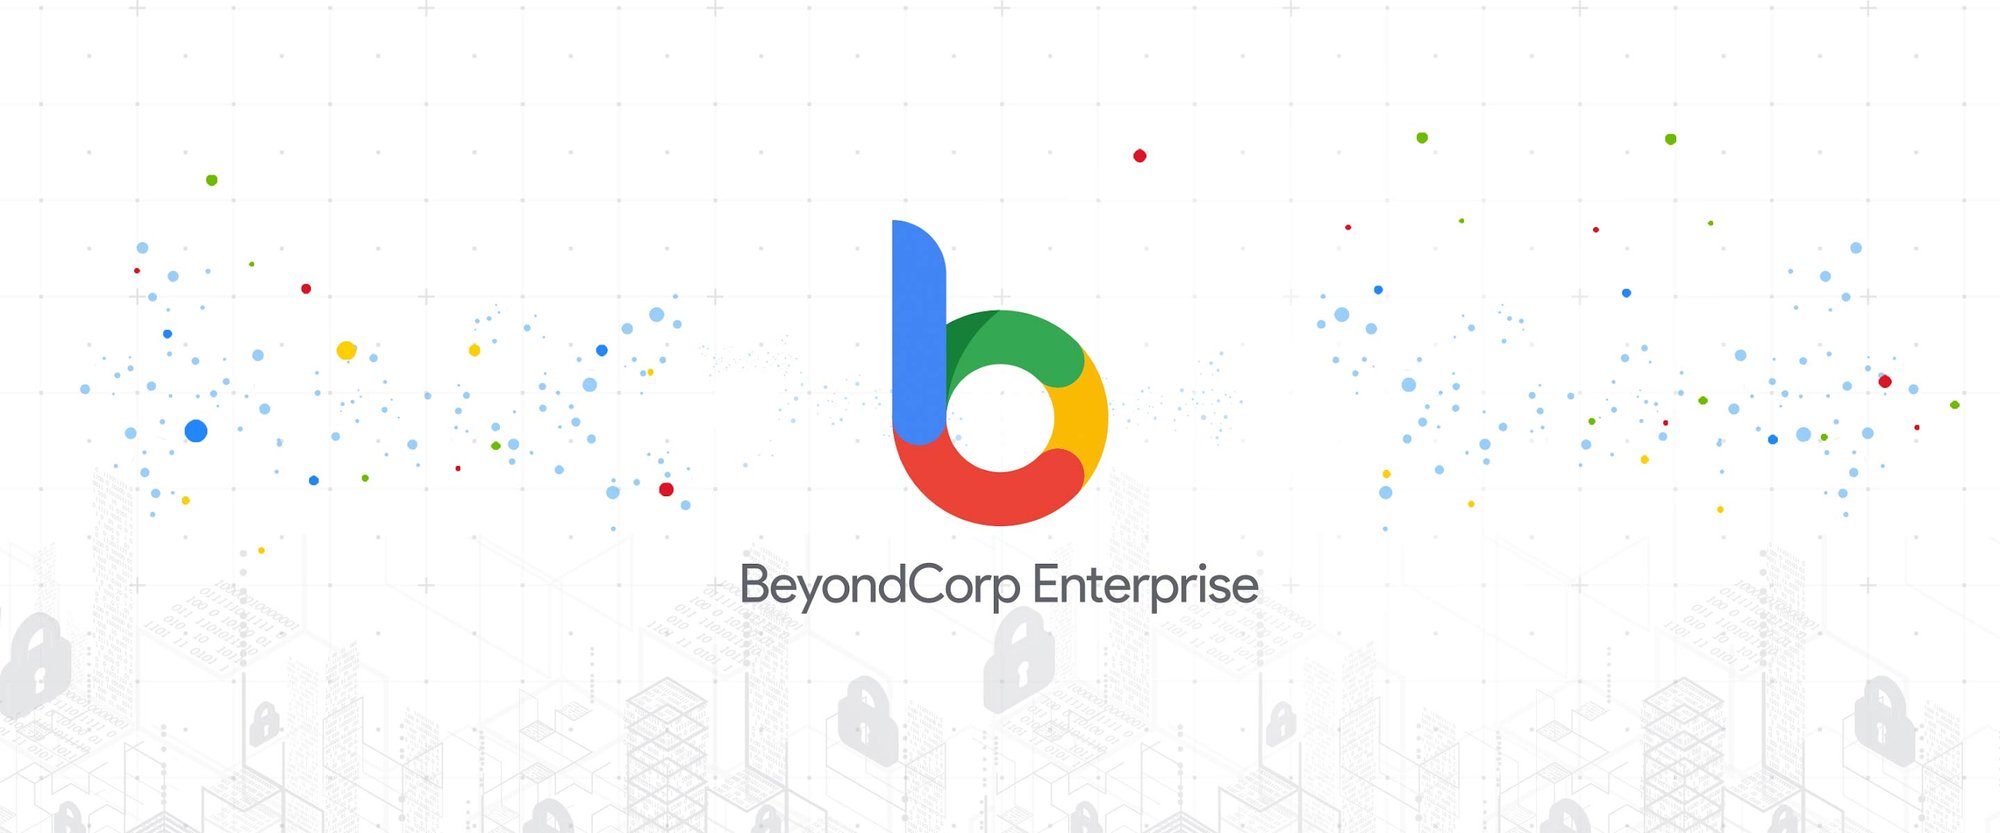 beyond_corp_ent.max-2600x2600